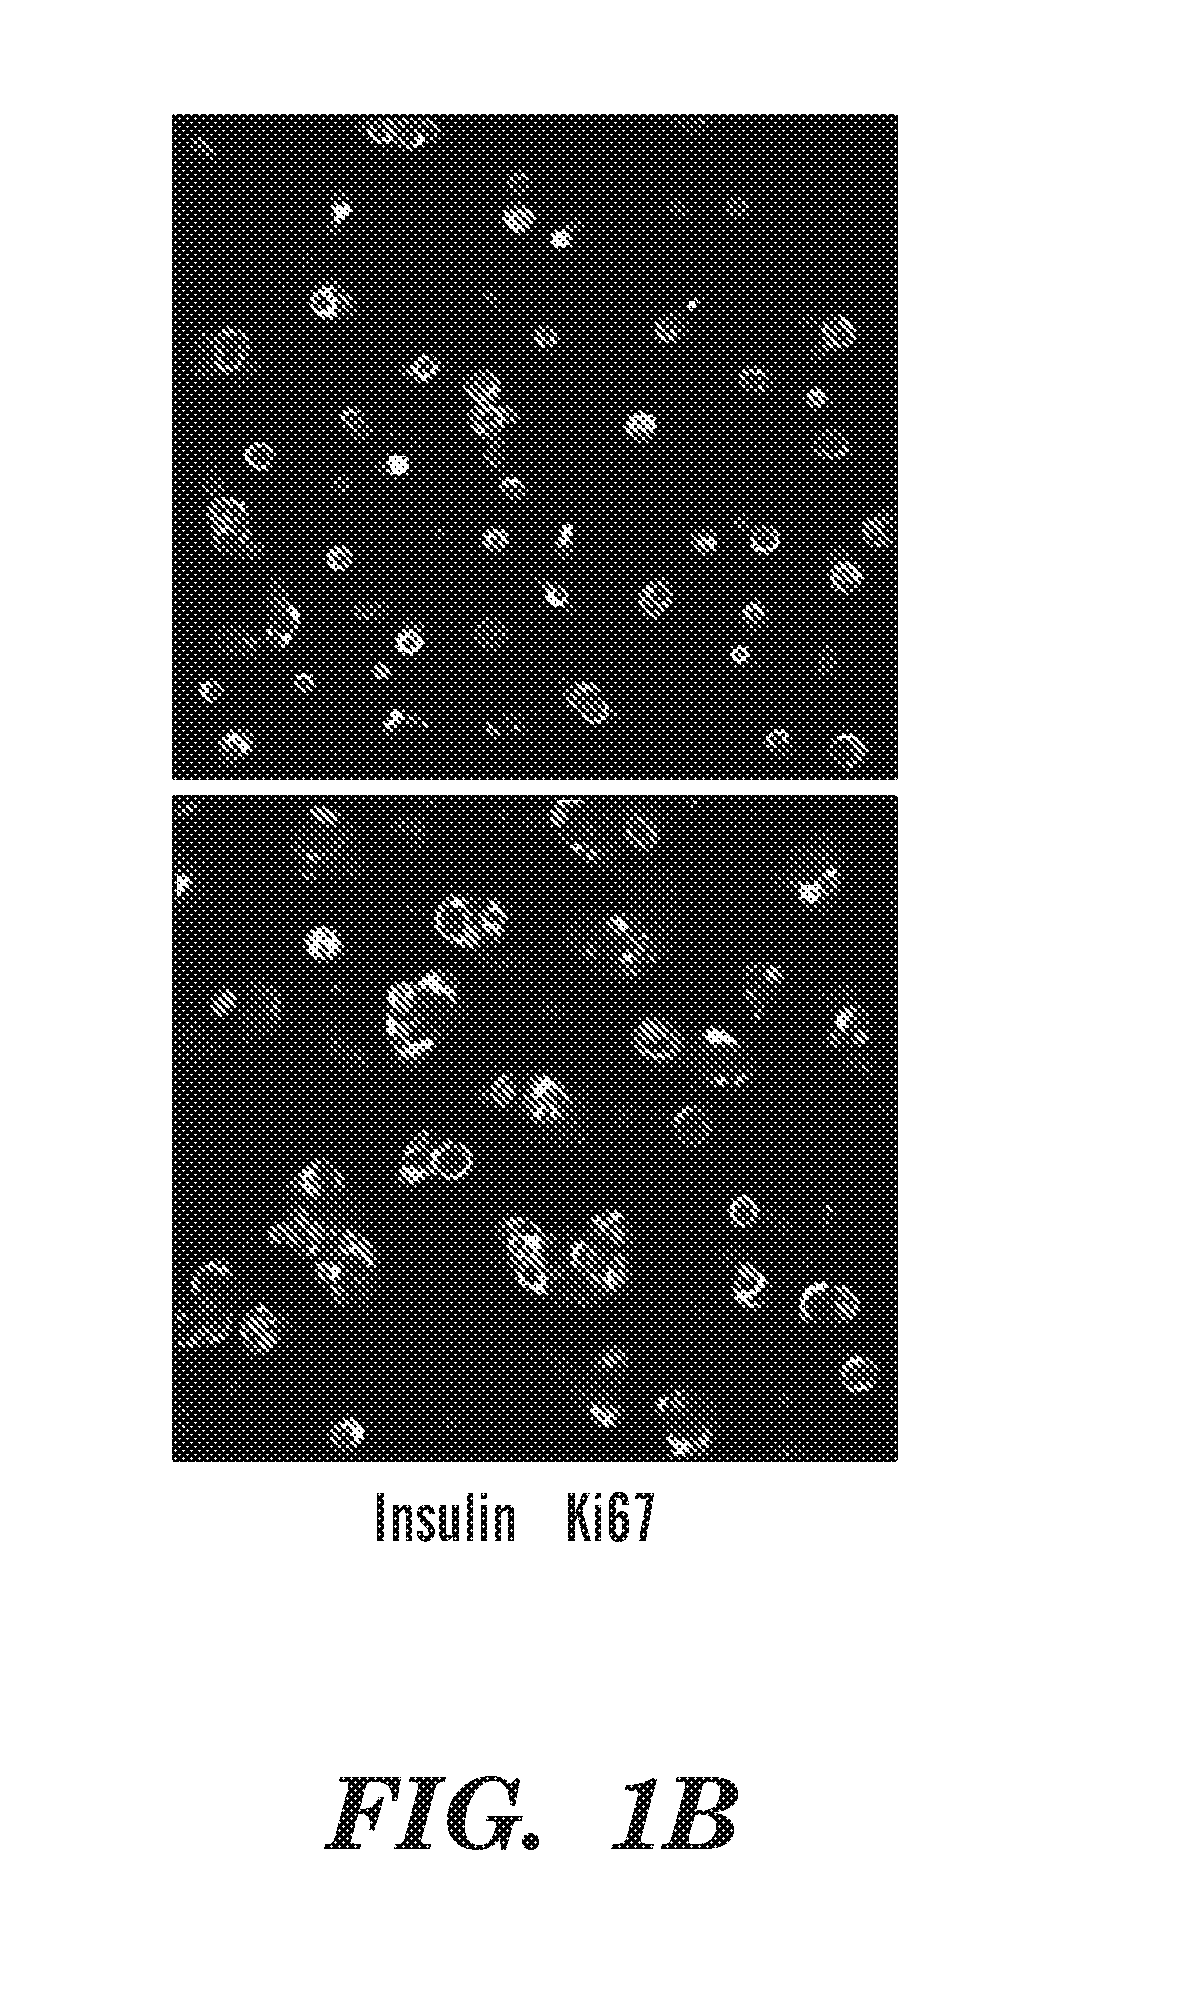 Method for increasing cell proliferation in pancreatic beta cells, treatment method, and composition